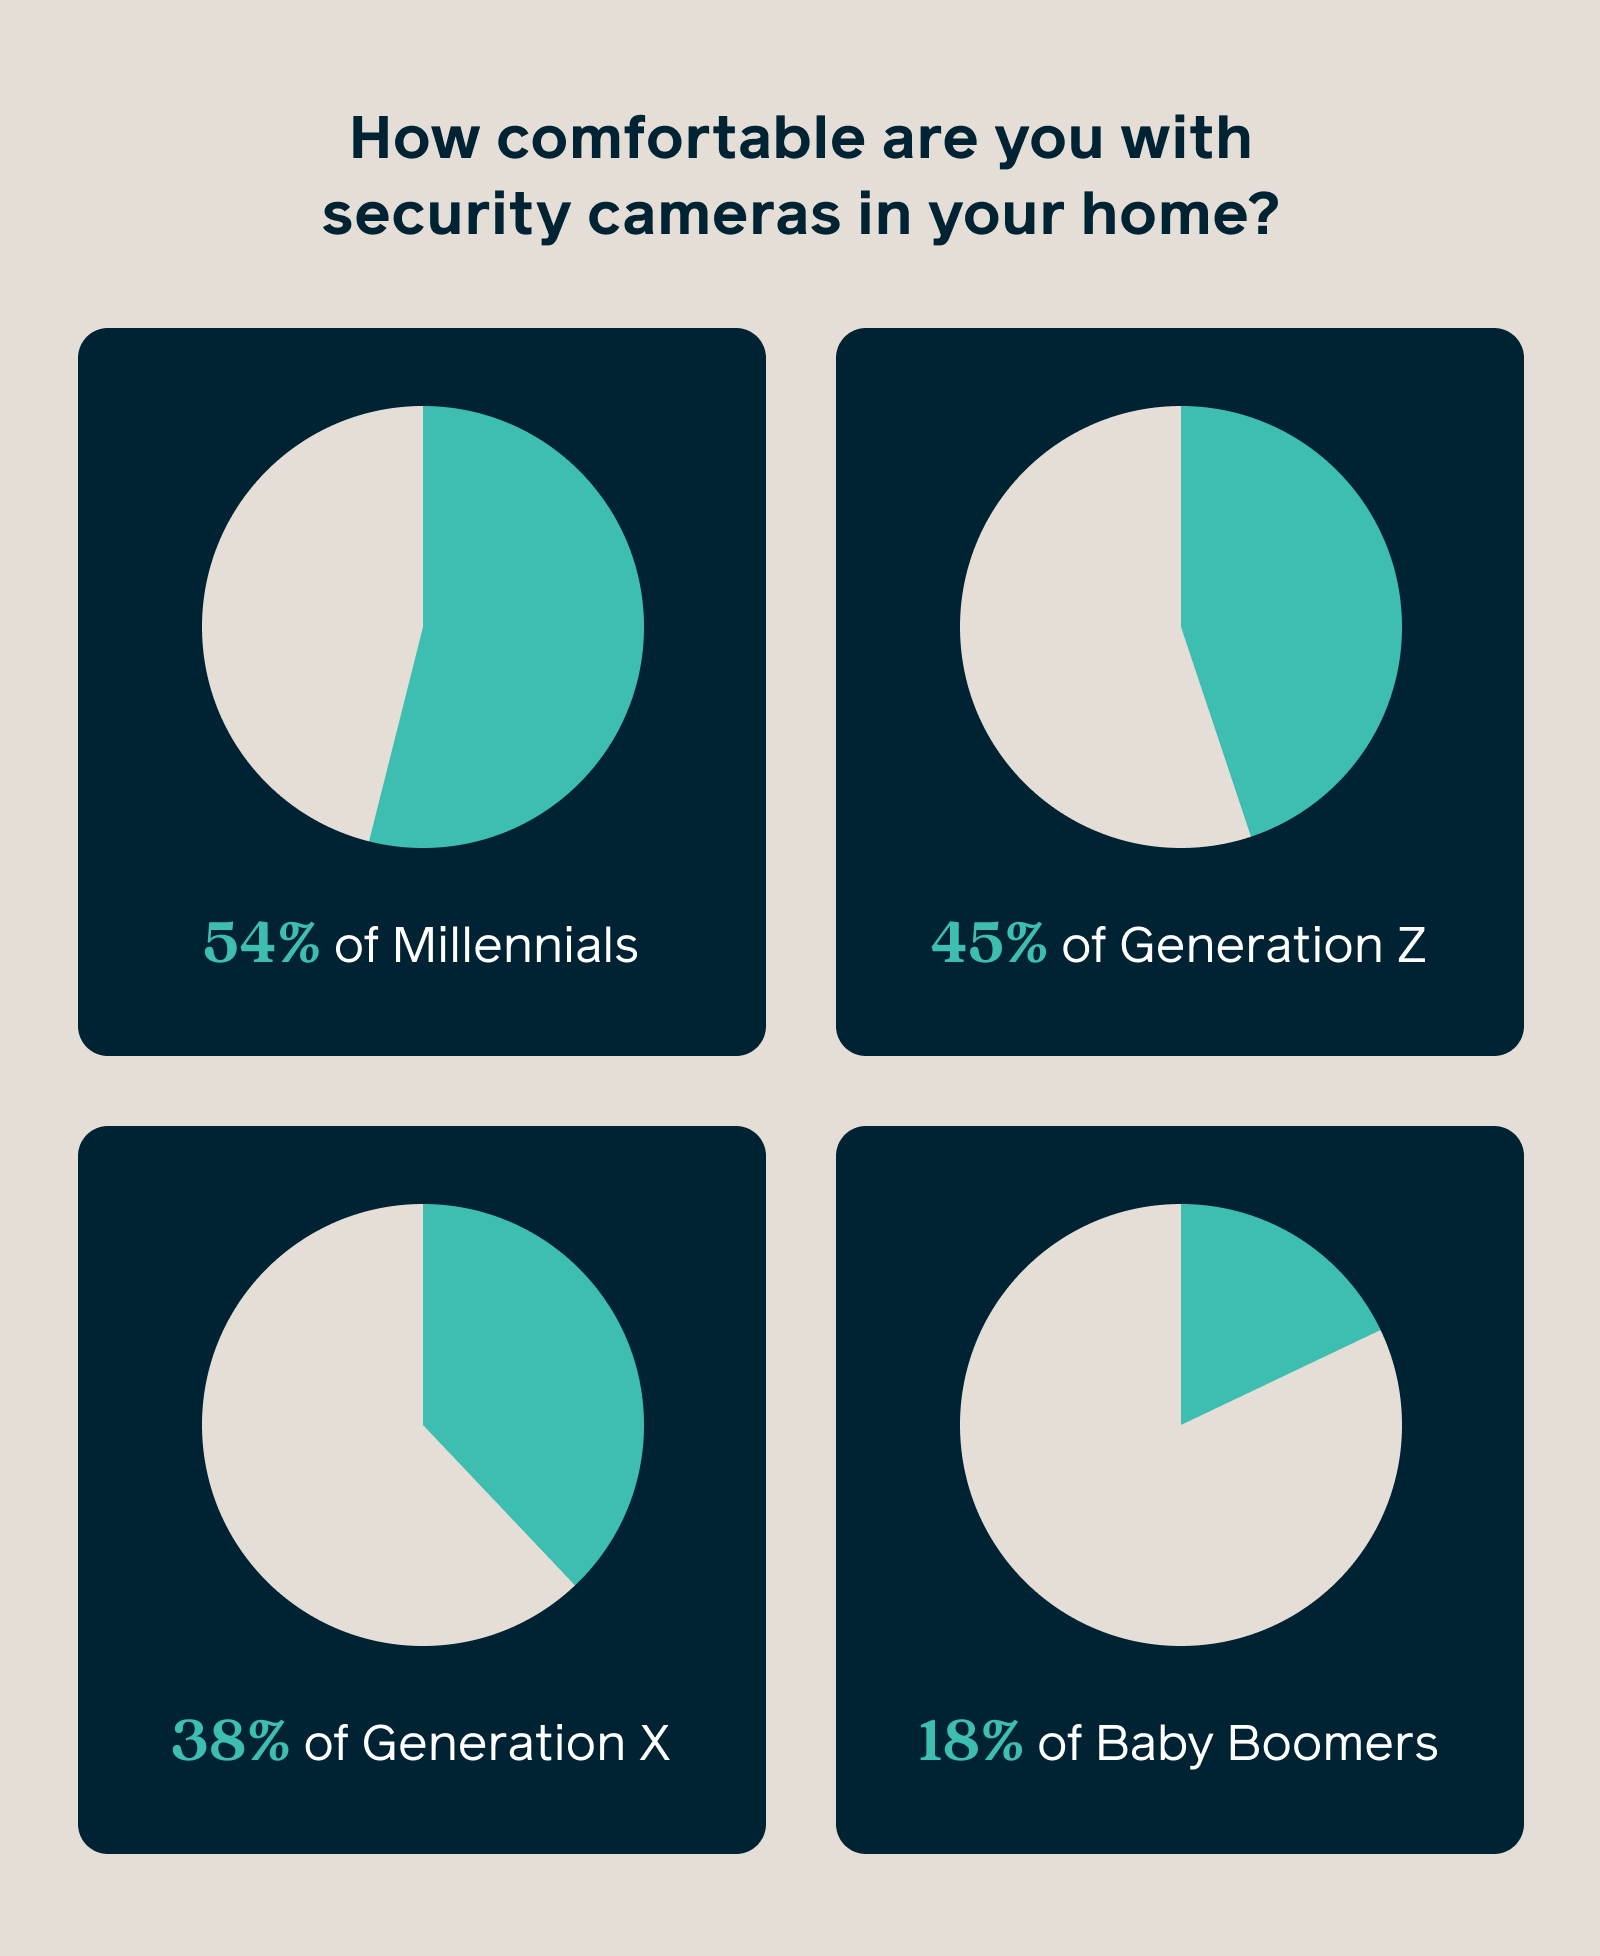 comfort level of home security cameras in the home by age / generation